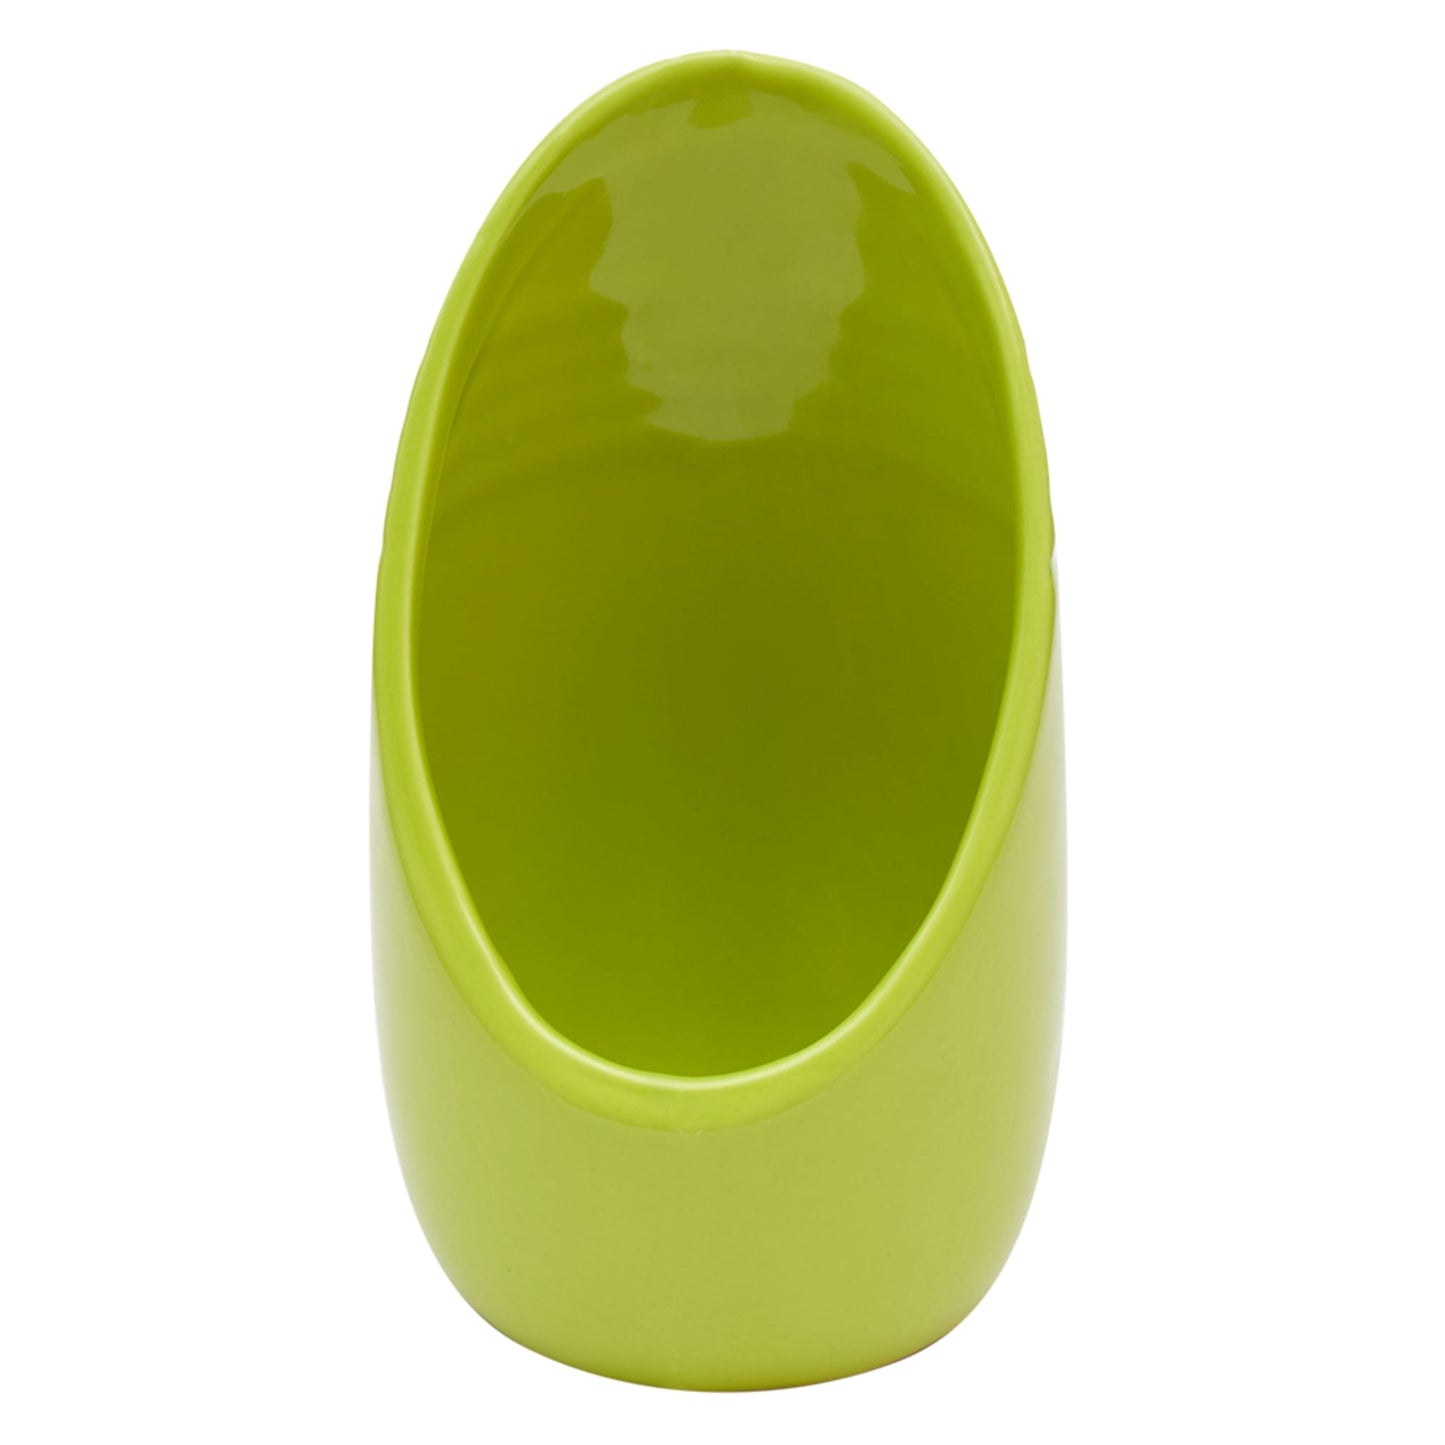 Stand Up Ceramic Spoon Rest, Lime Green